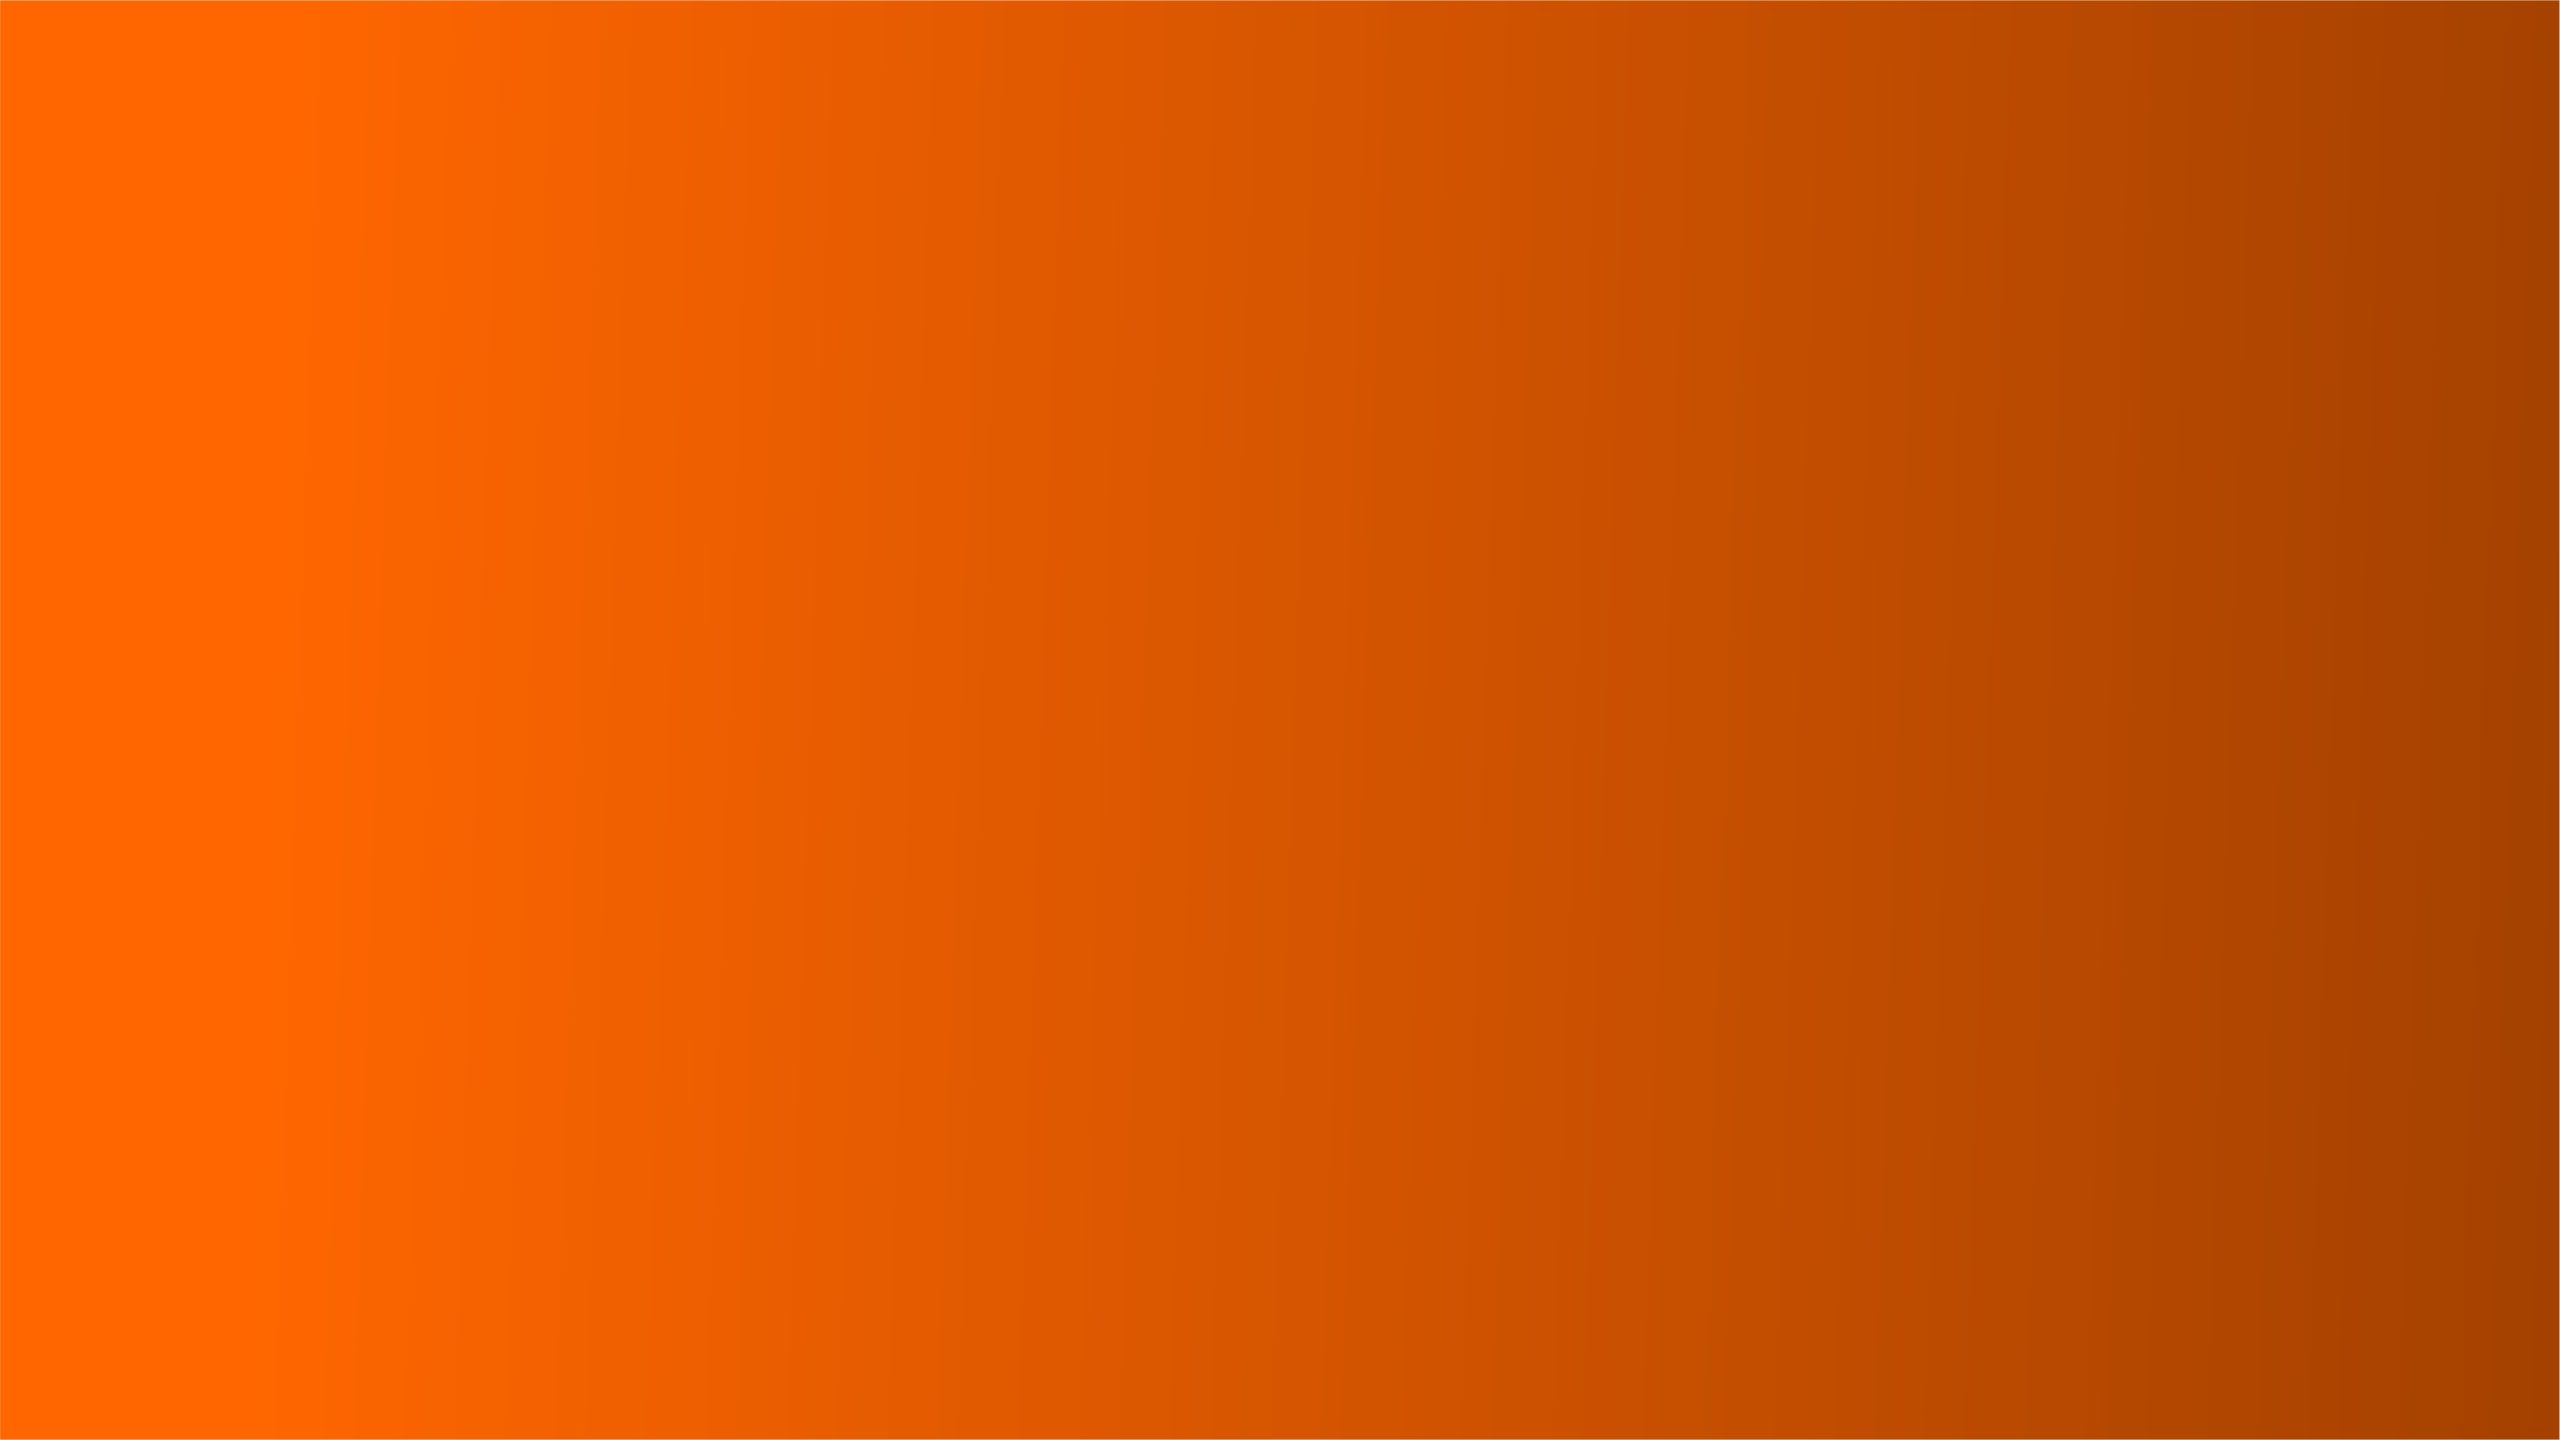 Orange Background Stock Photos Images and Backgrounds for Free Download